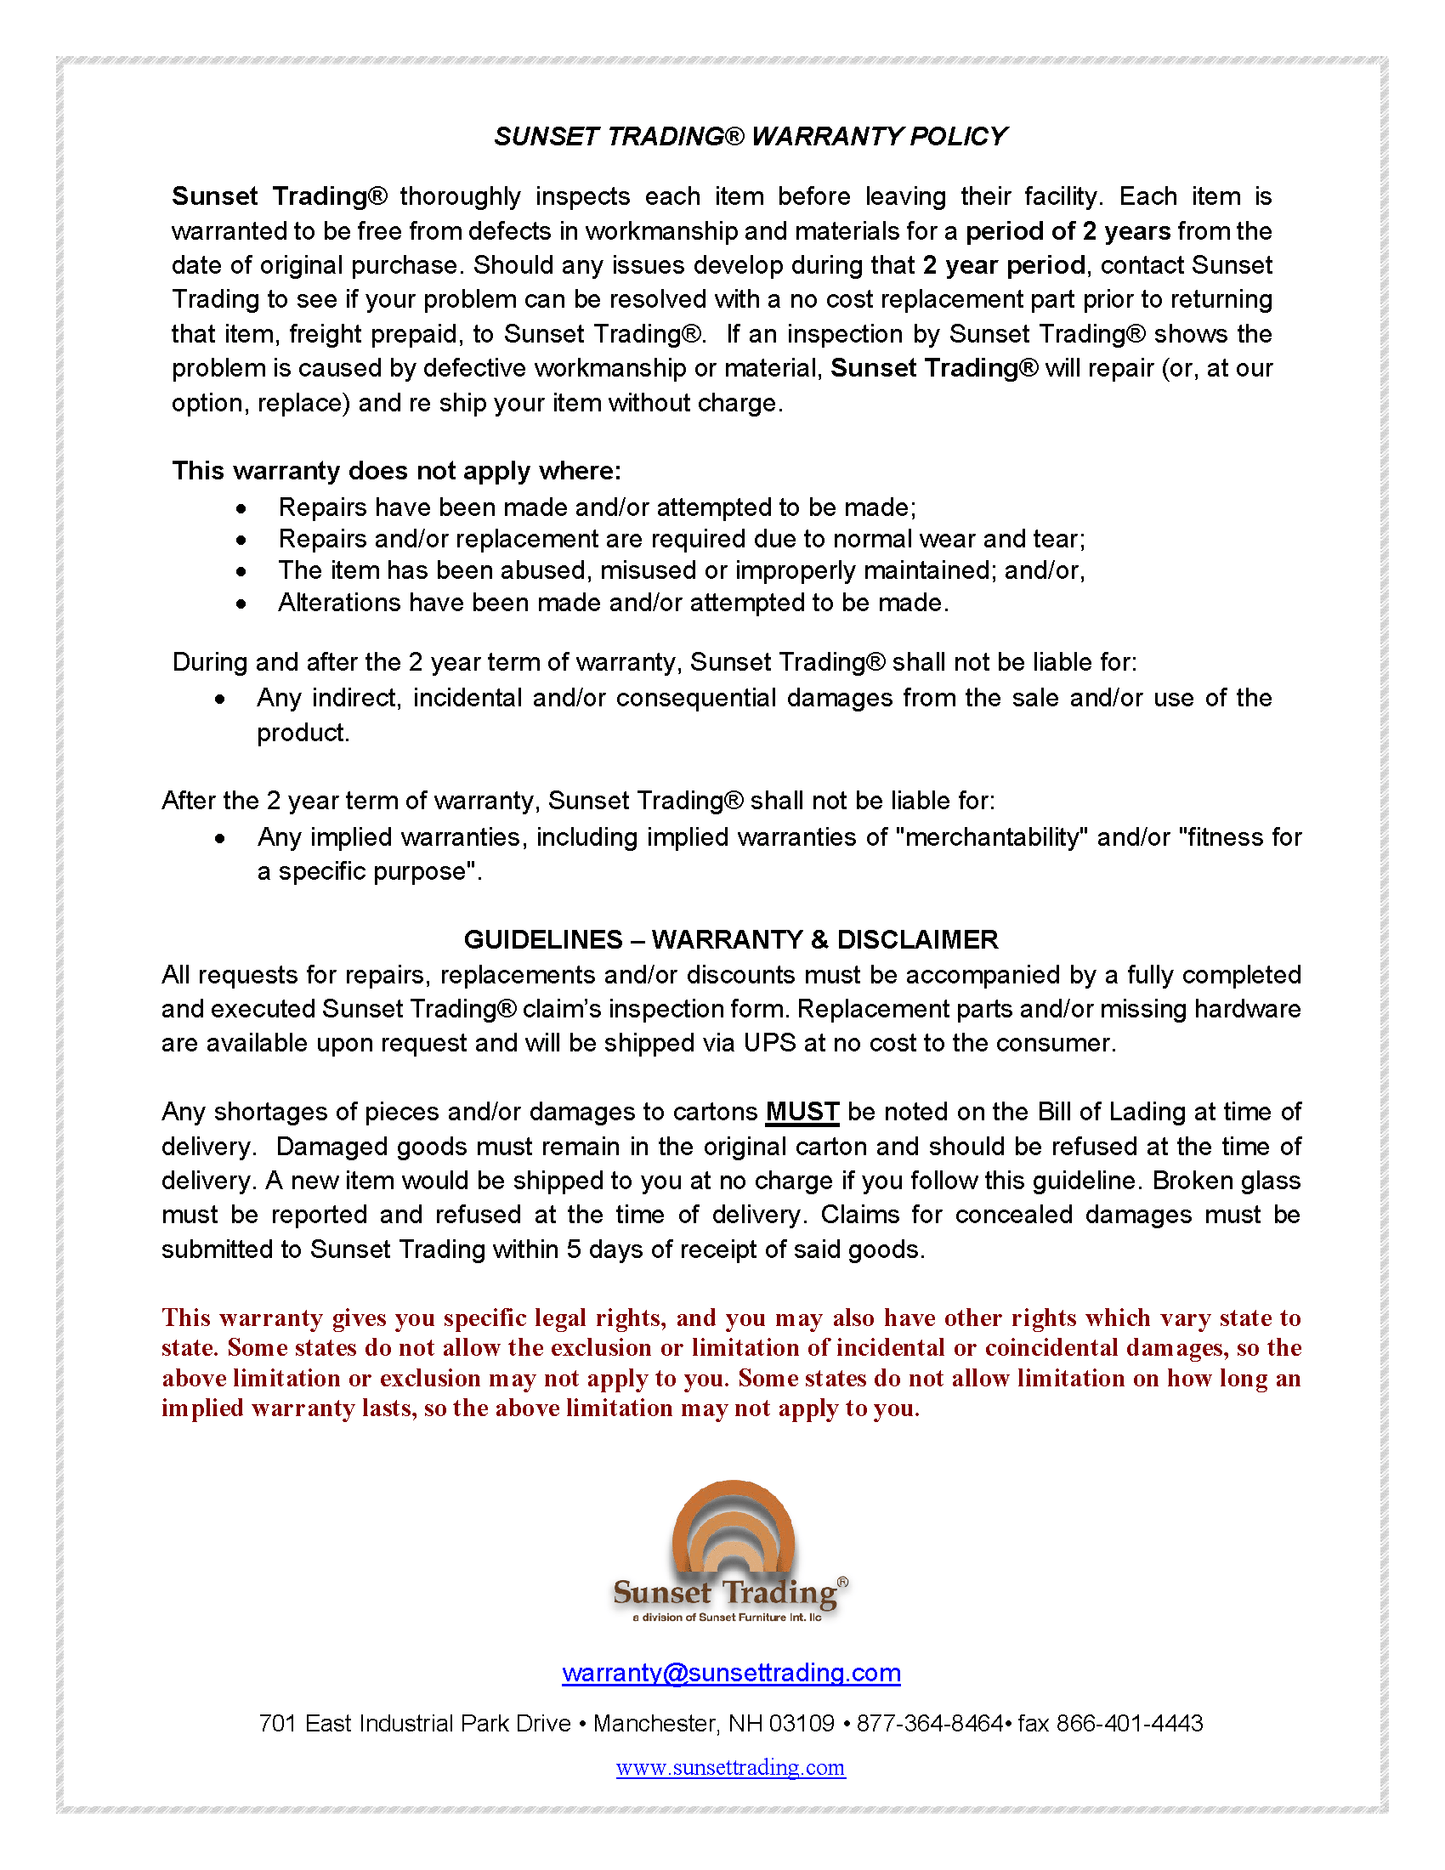 Sunset Trading's Warranty Policy